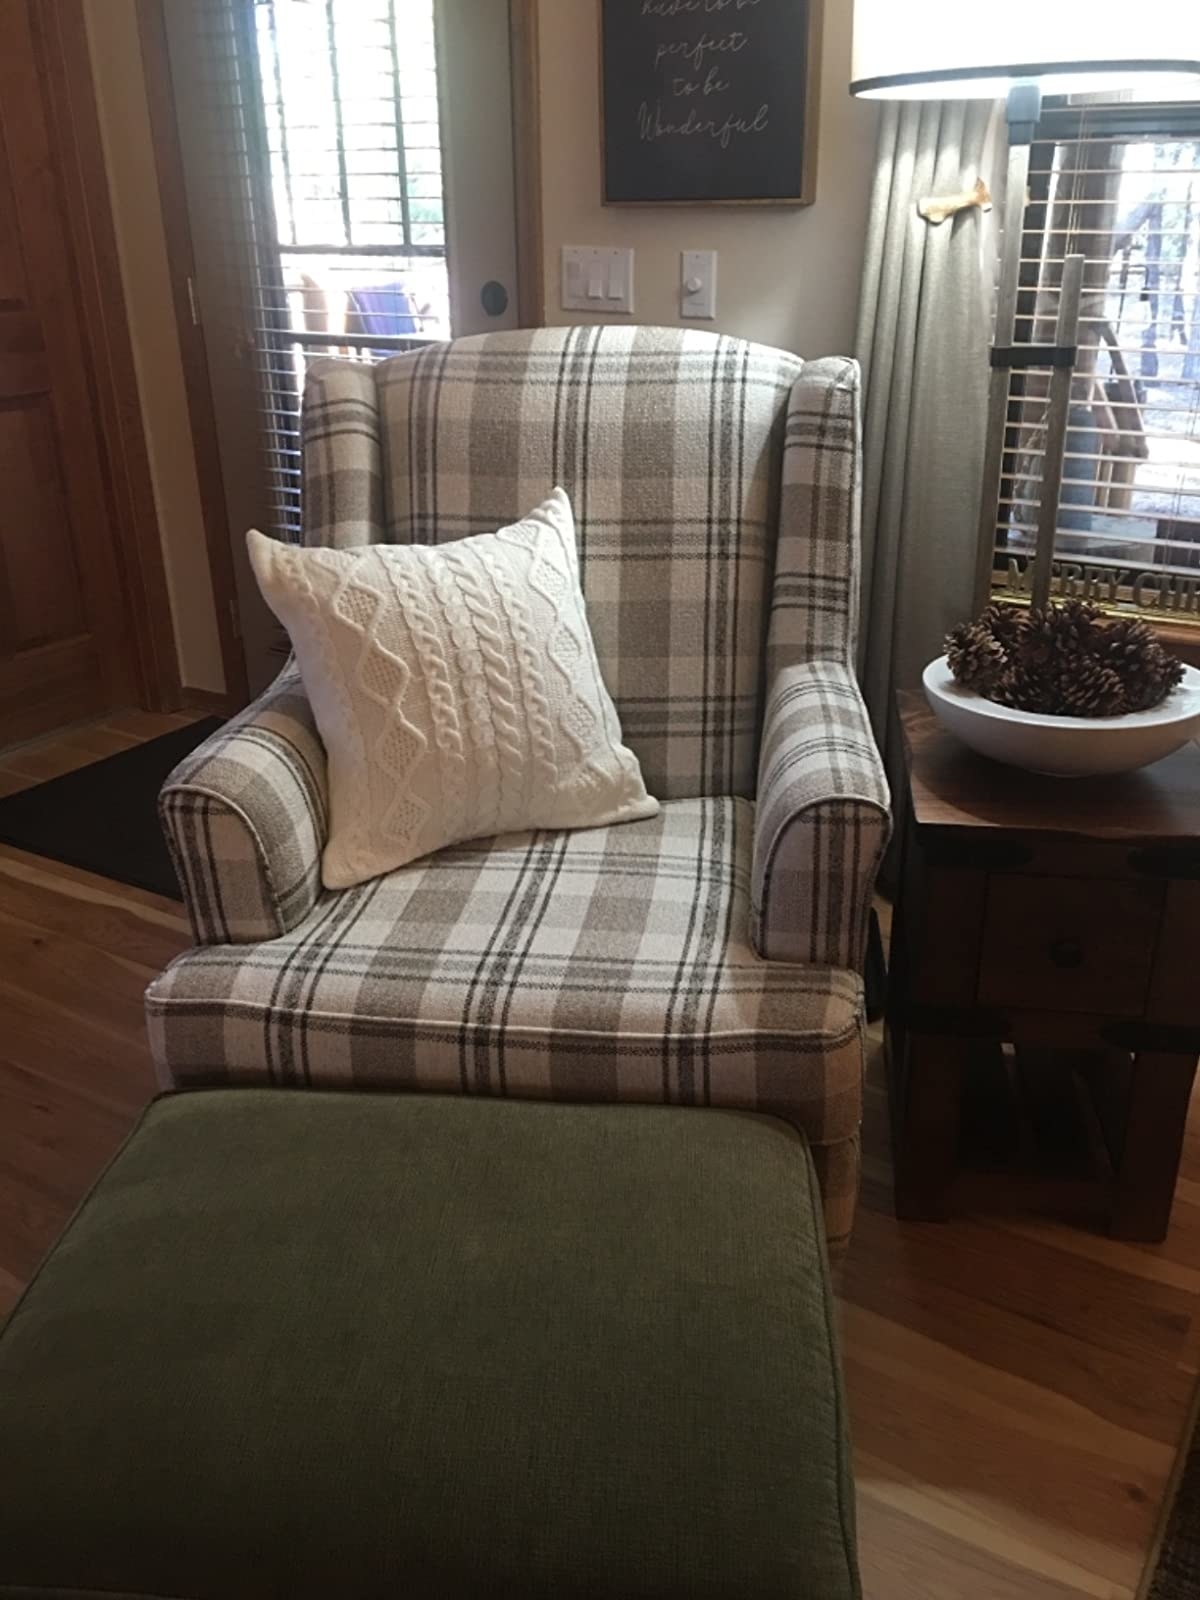 Reviewer image of white pillow on a plaid armchair